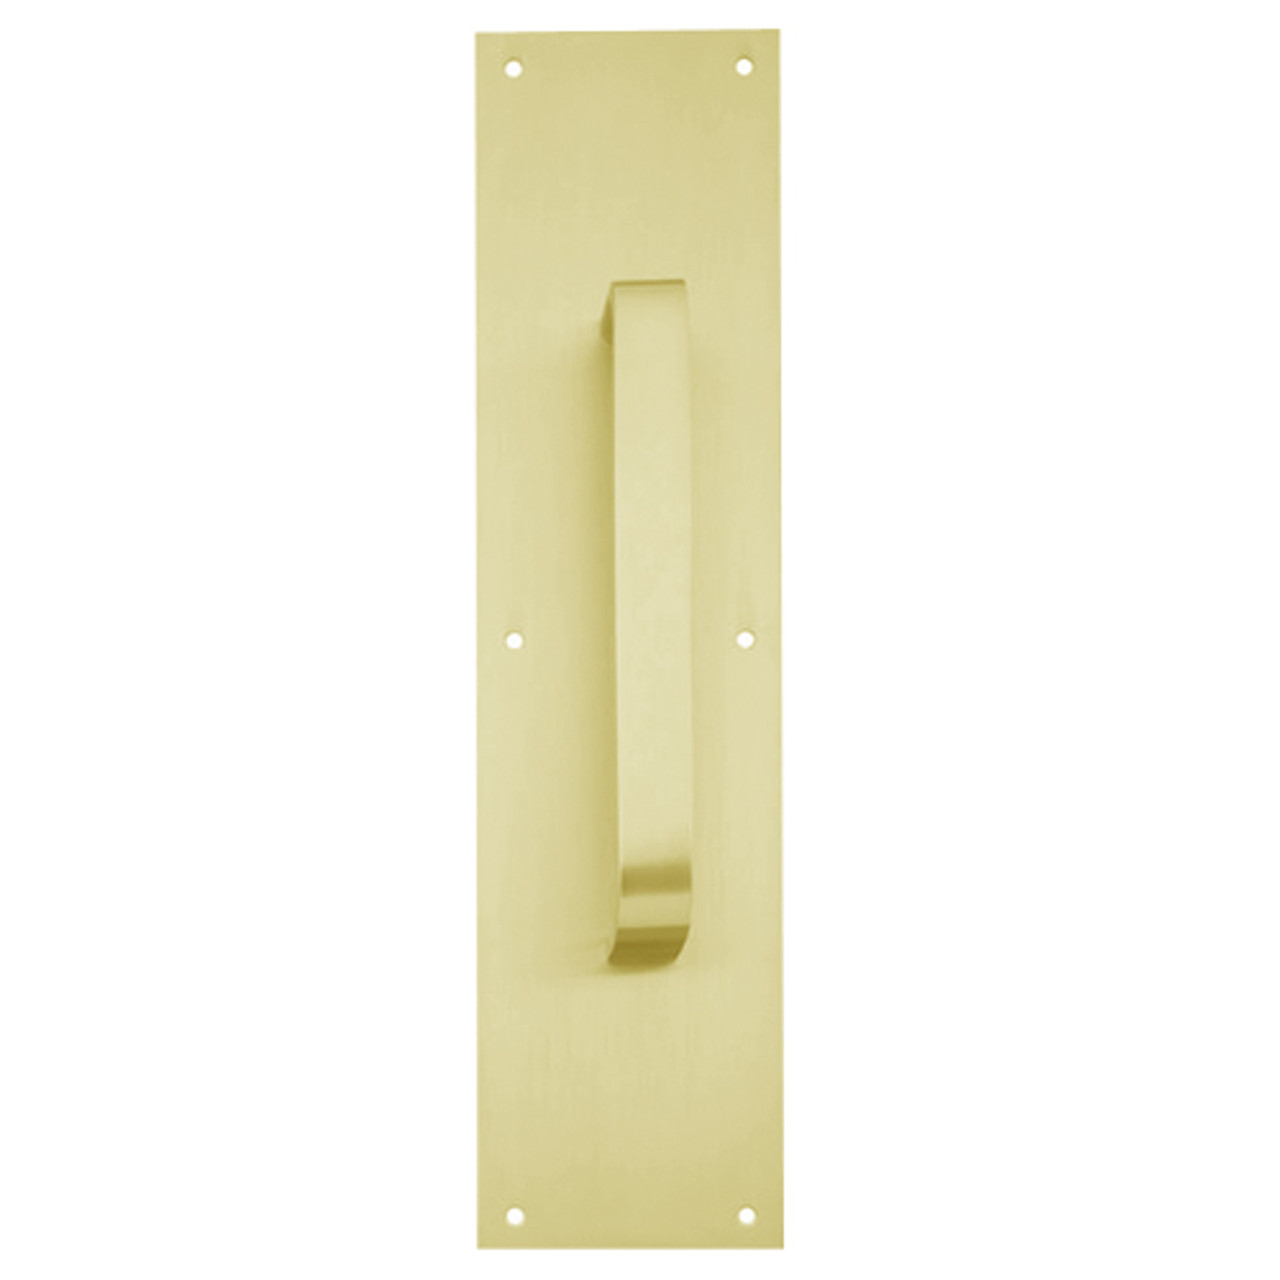 8305-10-US4-3-5x15 IVES Architectural Door Trim 3.5x15 Inch Pull Plate in Satin Brass